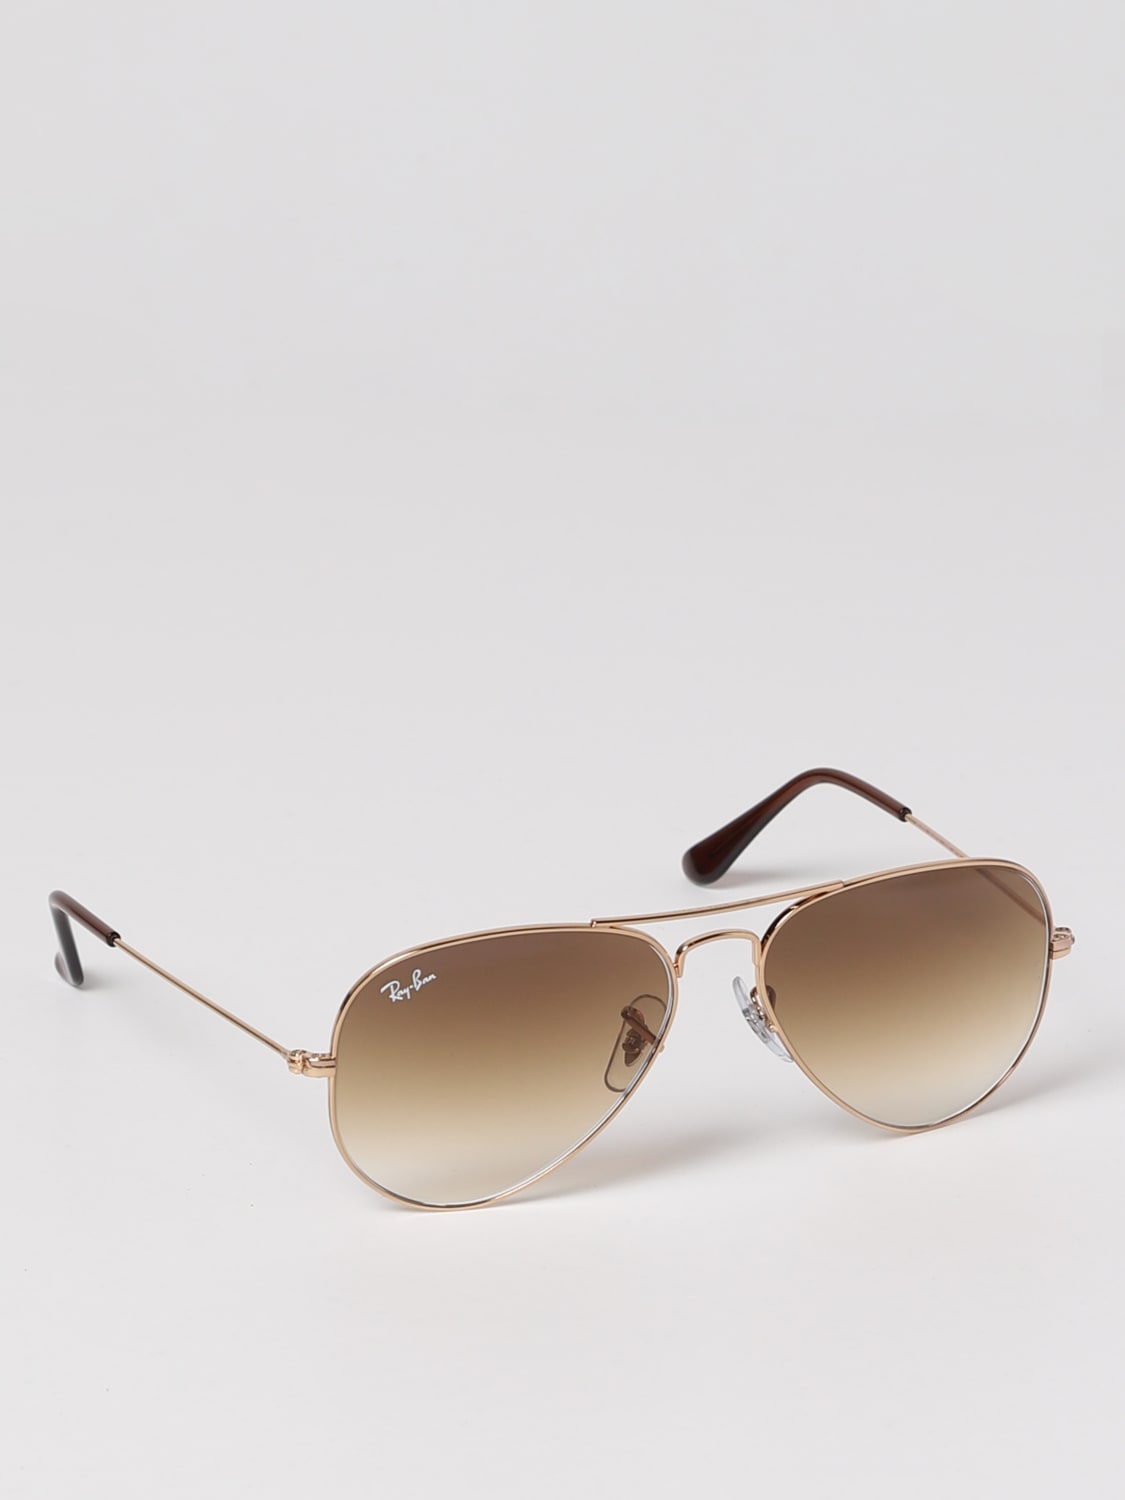 Ray-Ban Outlet: Aviator metal sunglasses - Brown | Ray-Ban sunglasses RB  3025 AVIATOR online at GIGLIO.COM